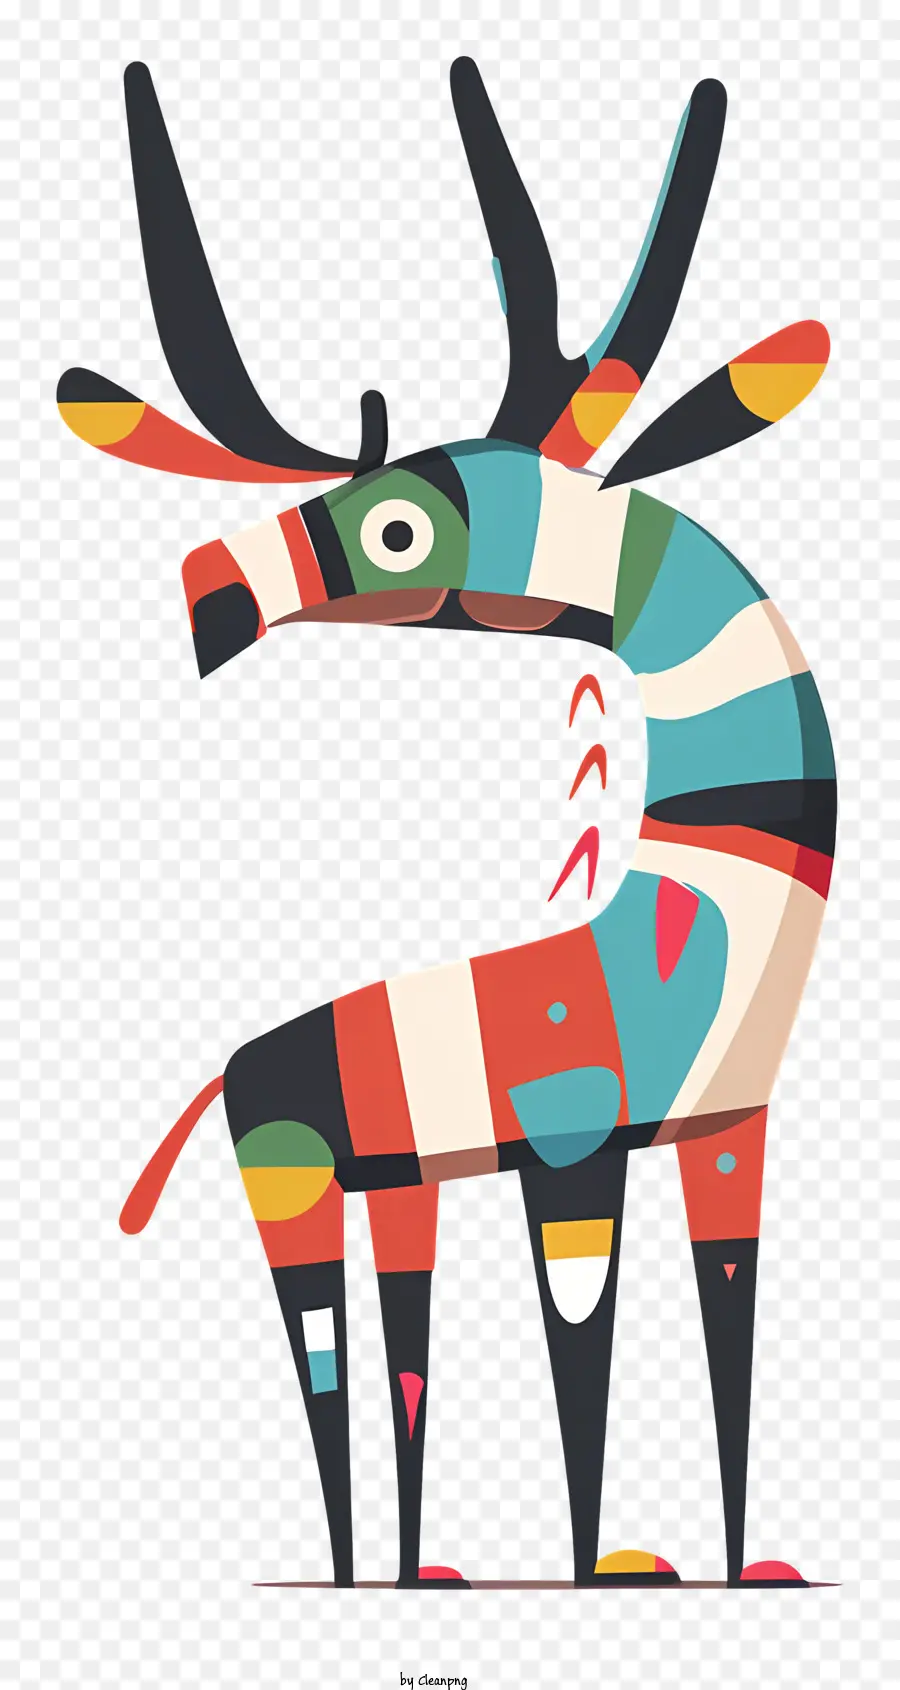 weird reindeer colorful deer large antlers abstract patterns colorful animal